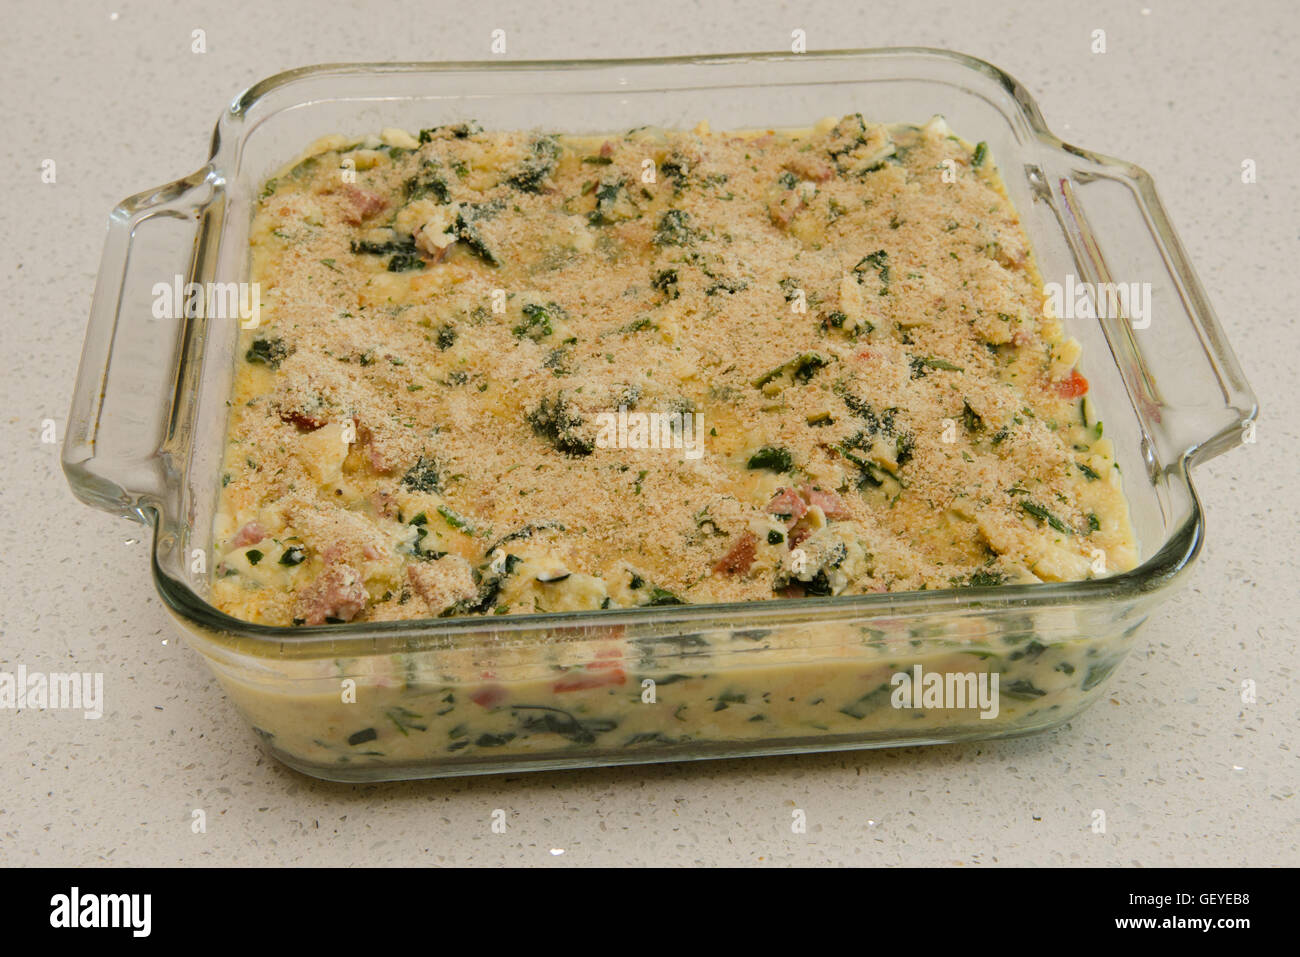 prepared casserole with bread crumbs in glass baking dish before baking Stock Photo